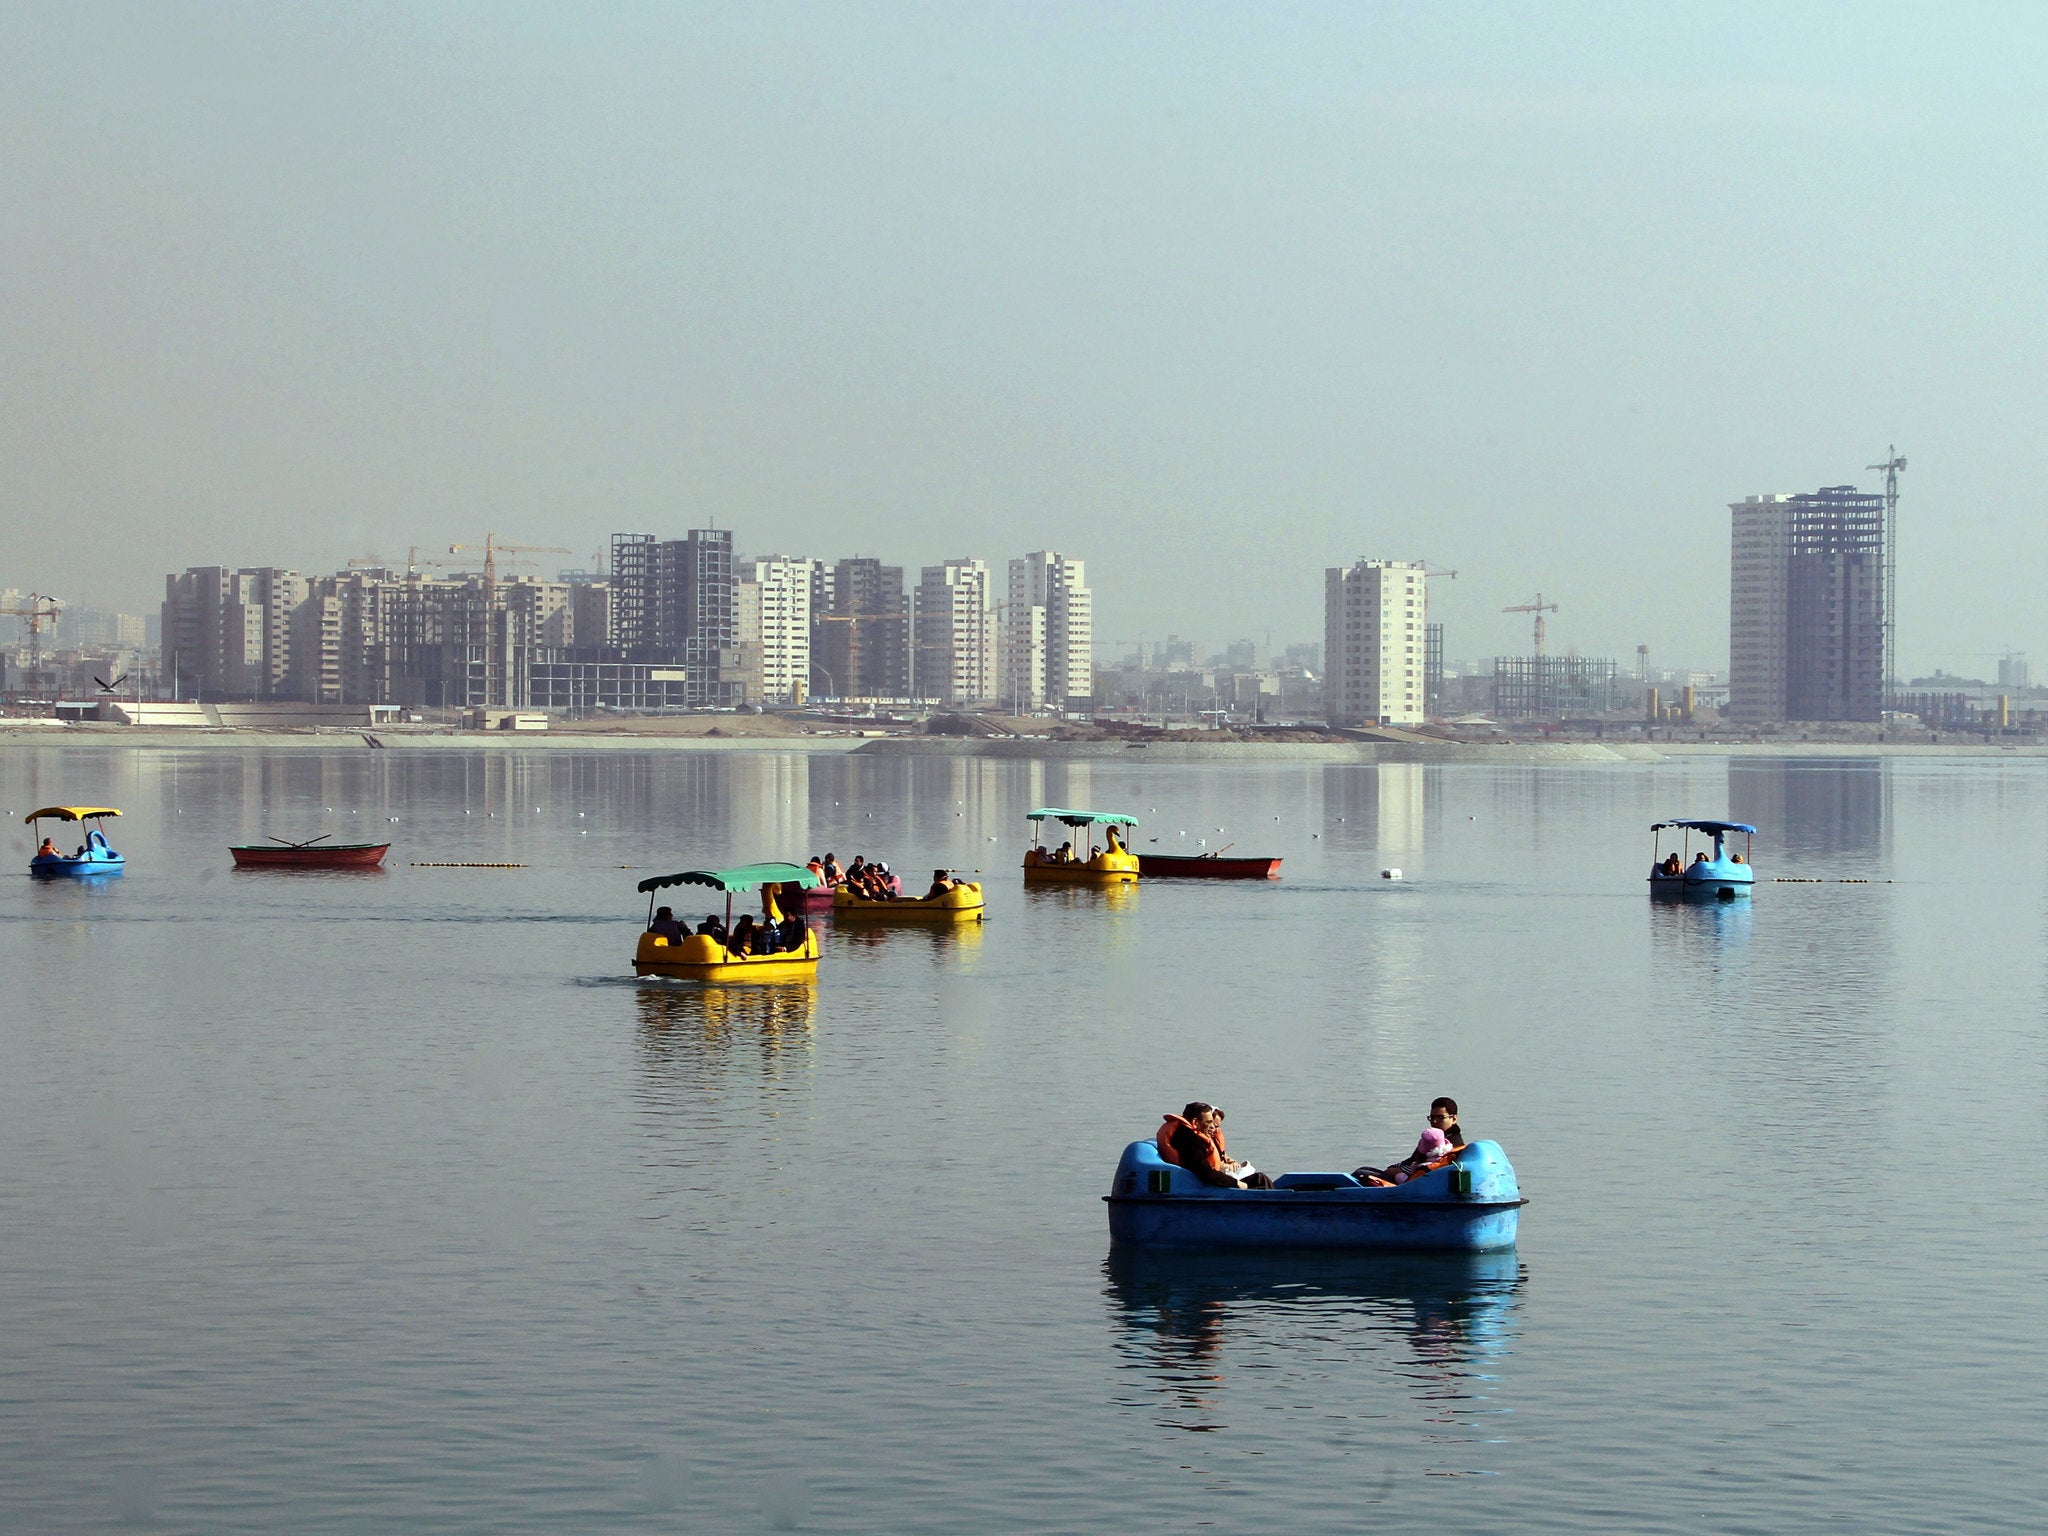 Iranian families riding pedal boats on Chitgar lake in western Tehran